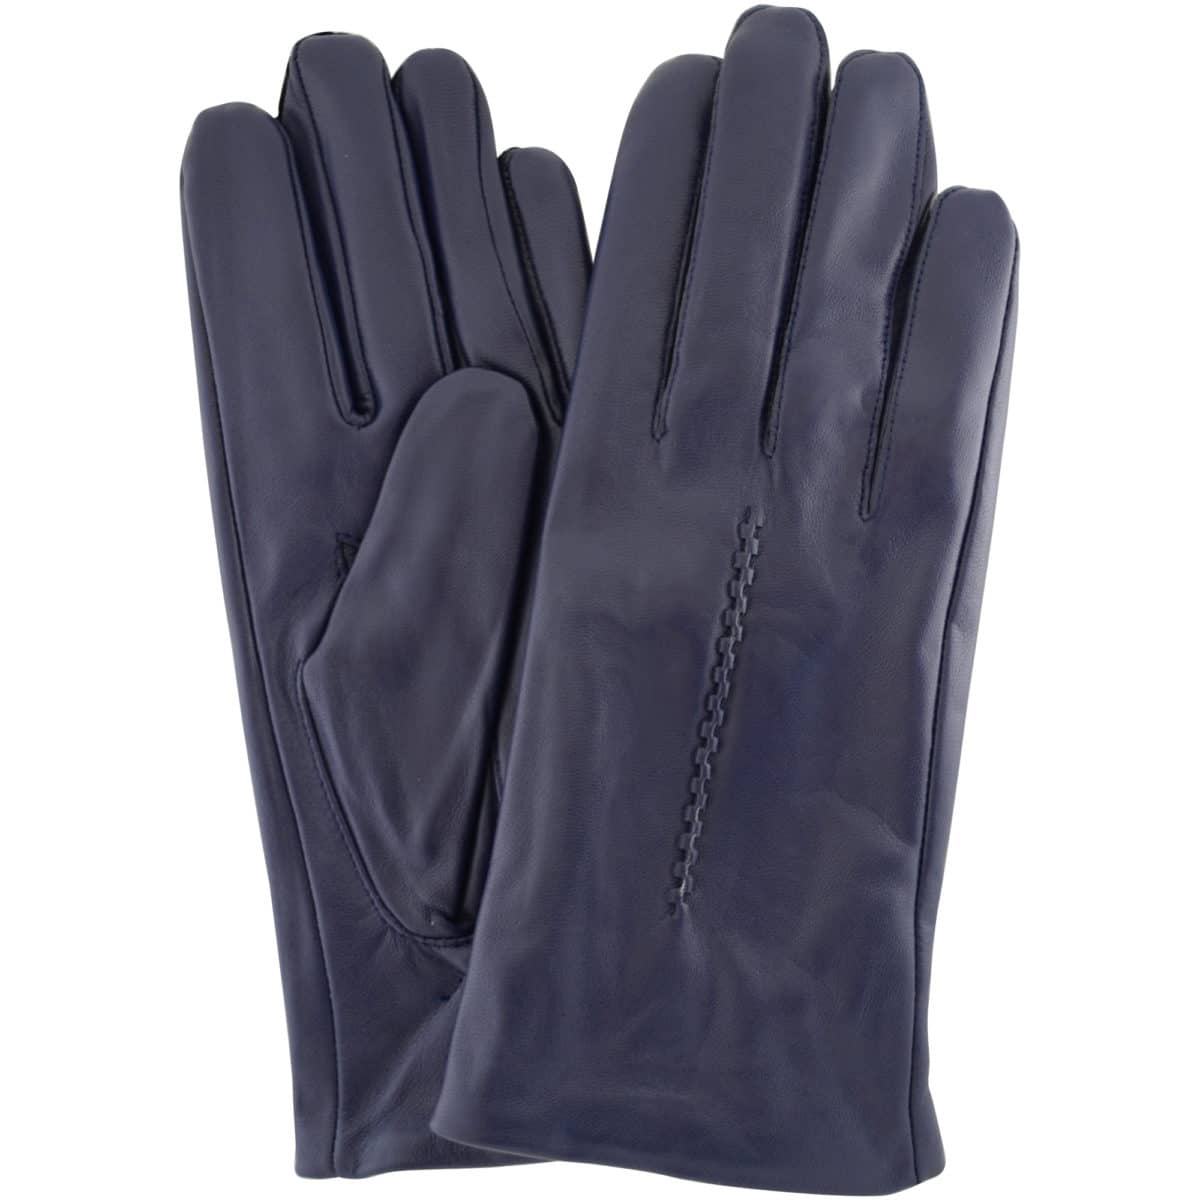 navy blue leather gloves